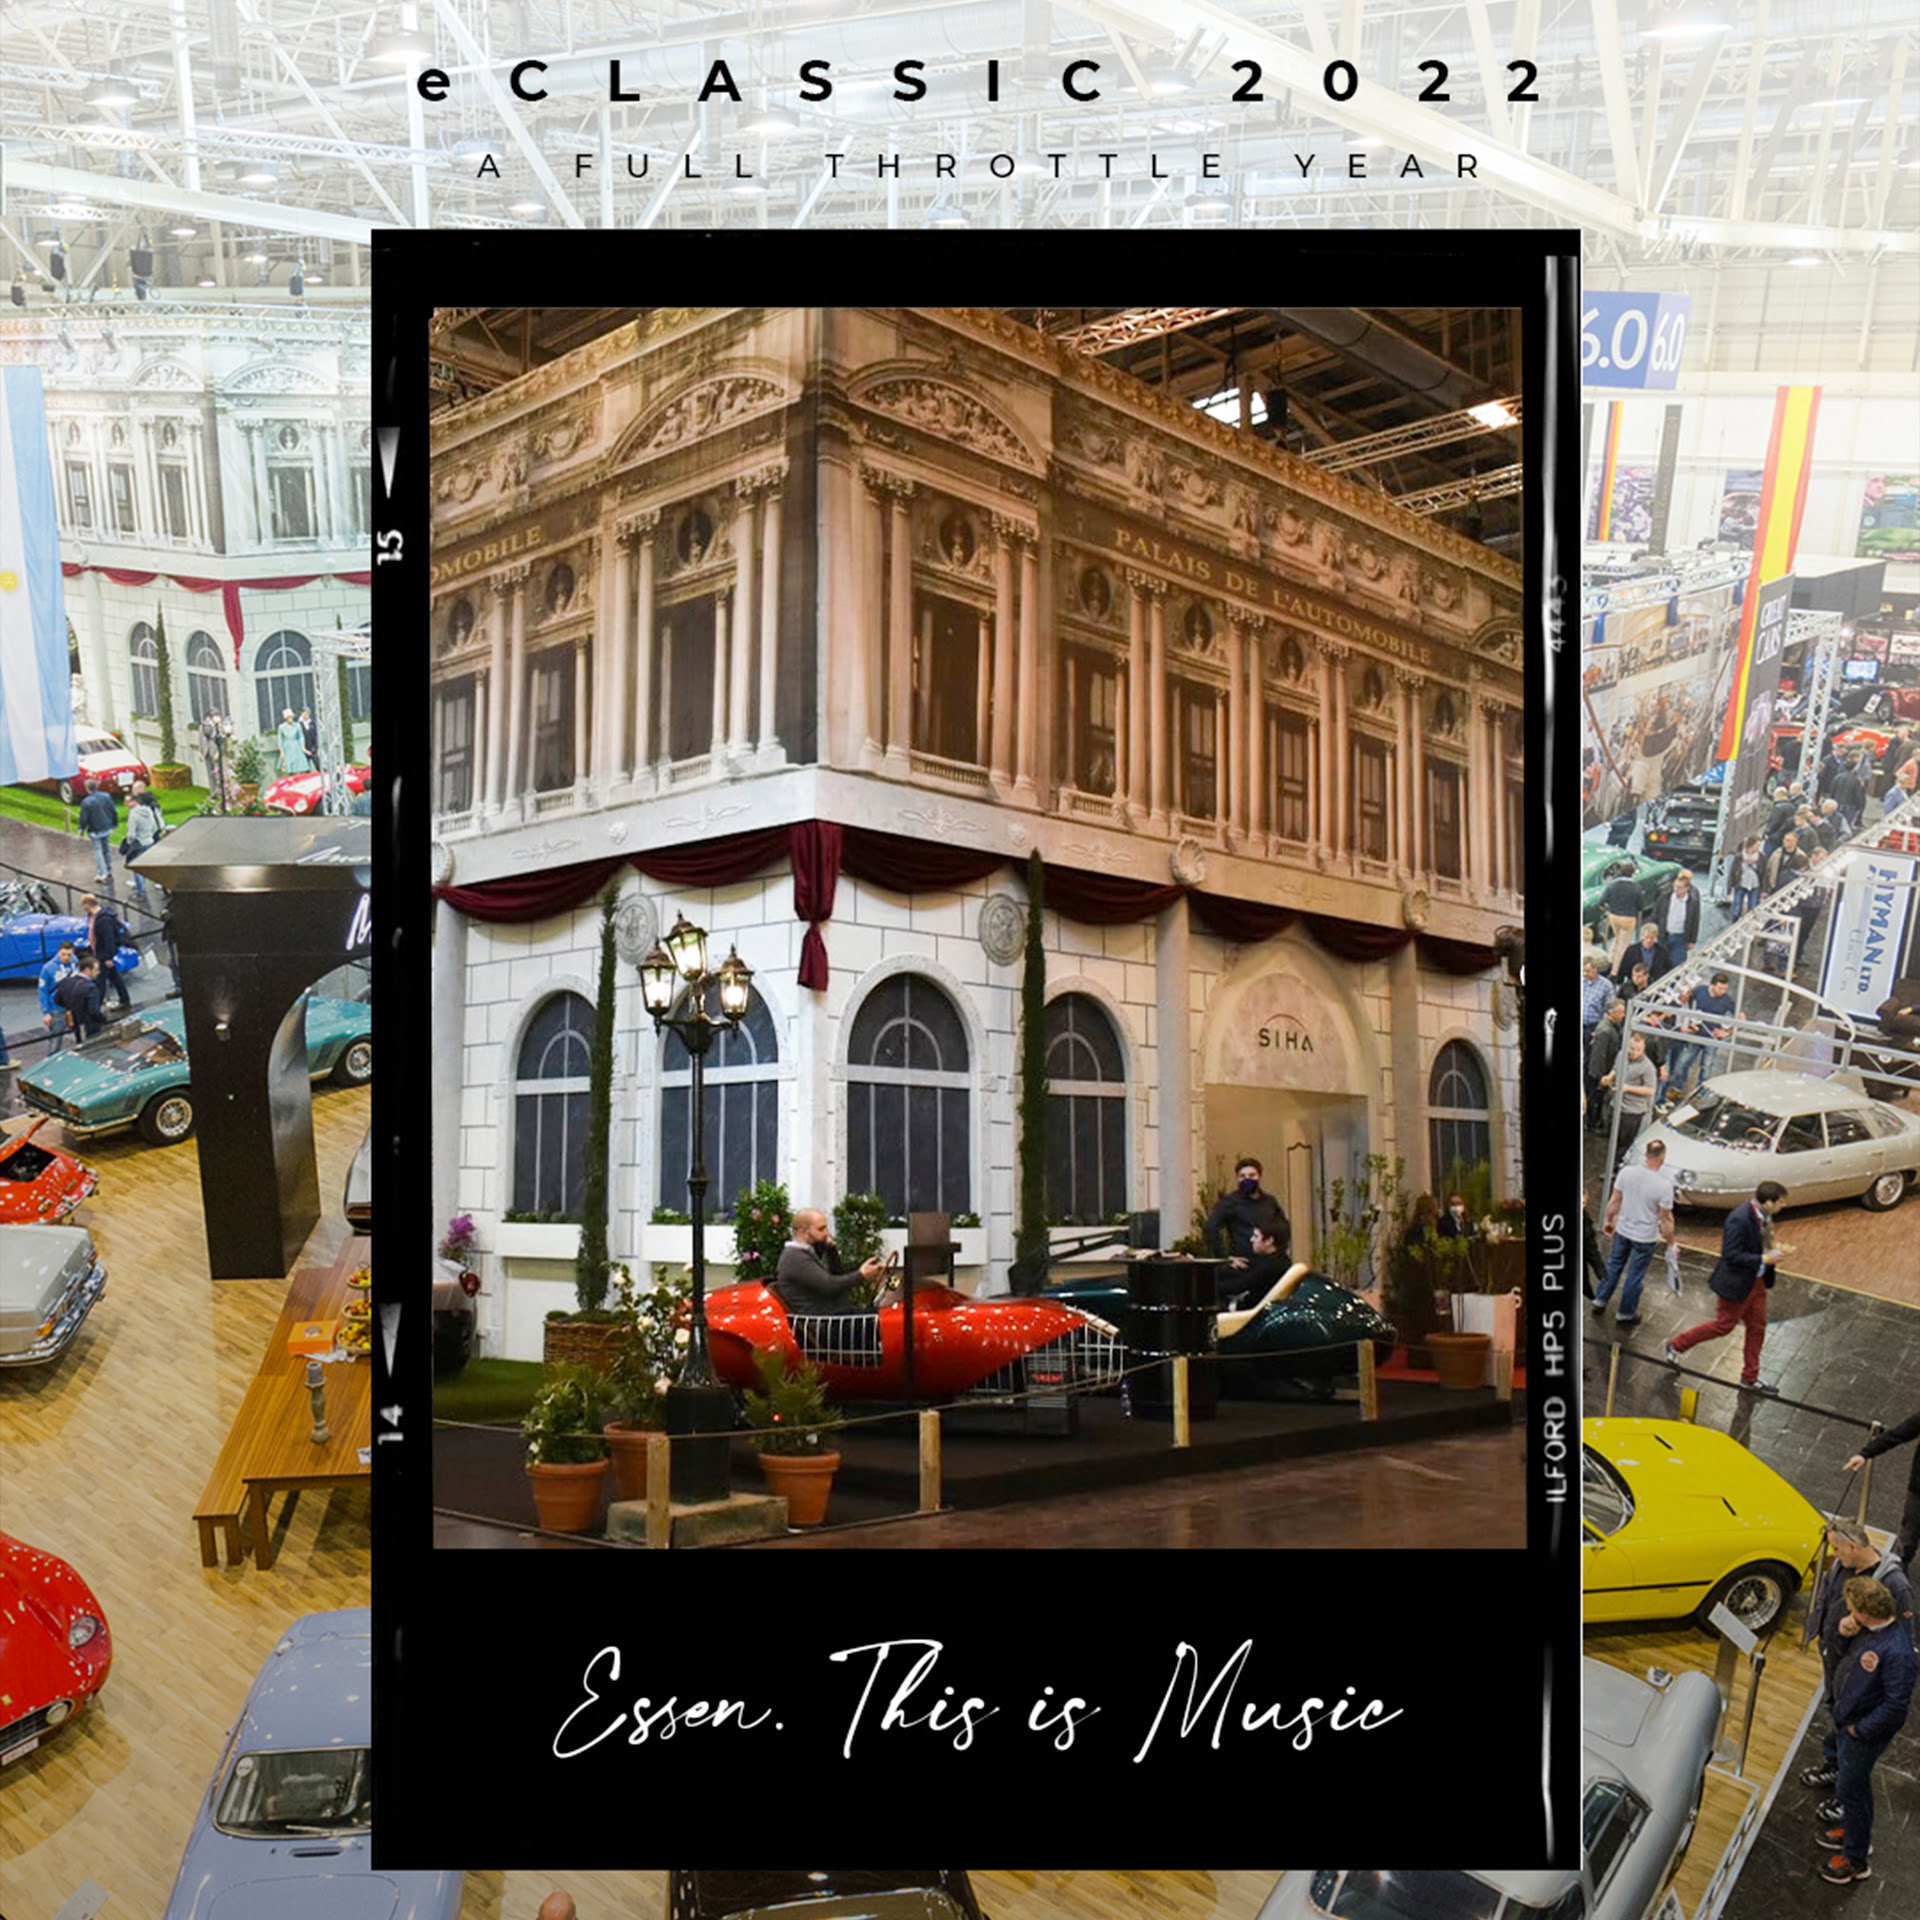 eClassic 2022: a full throttle year Essen. This is music image